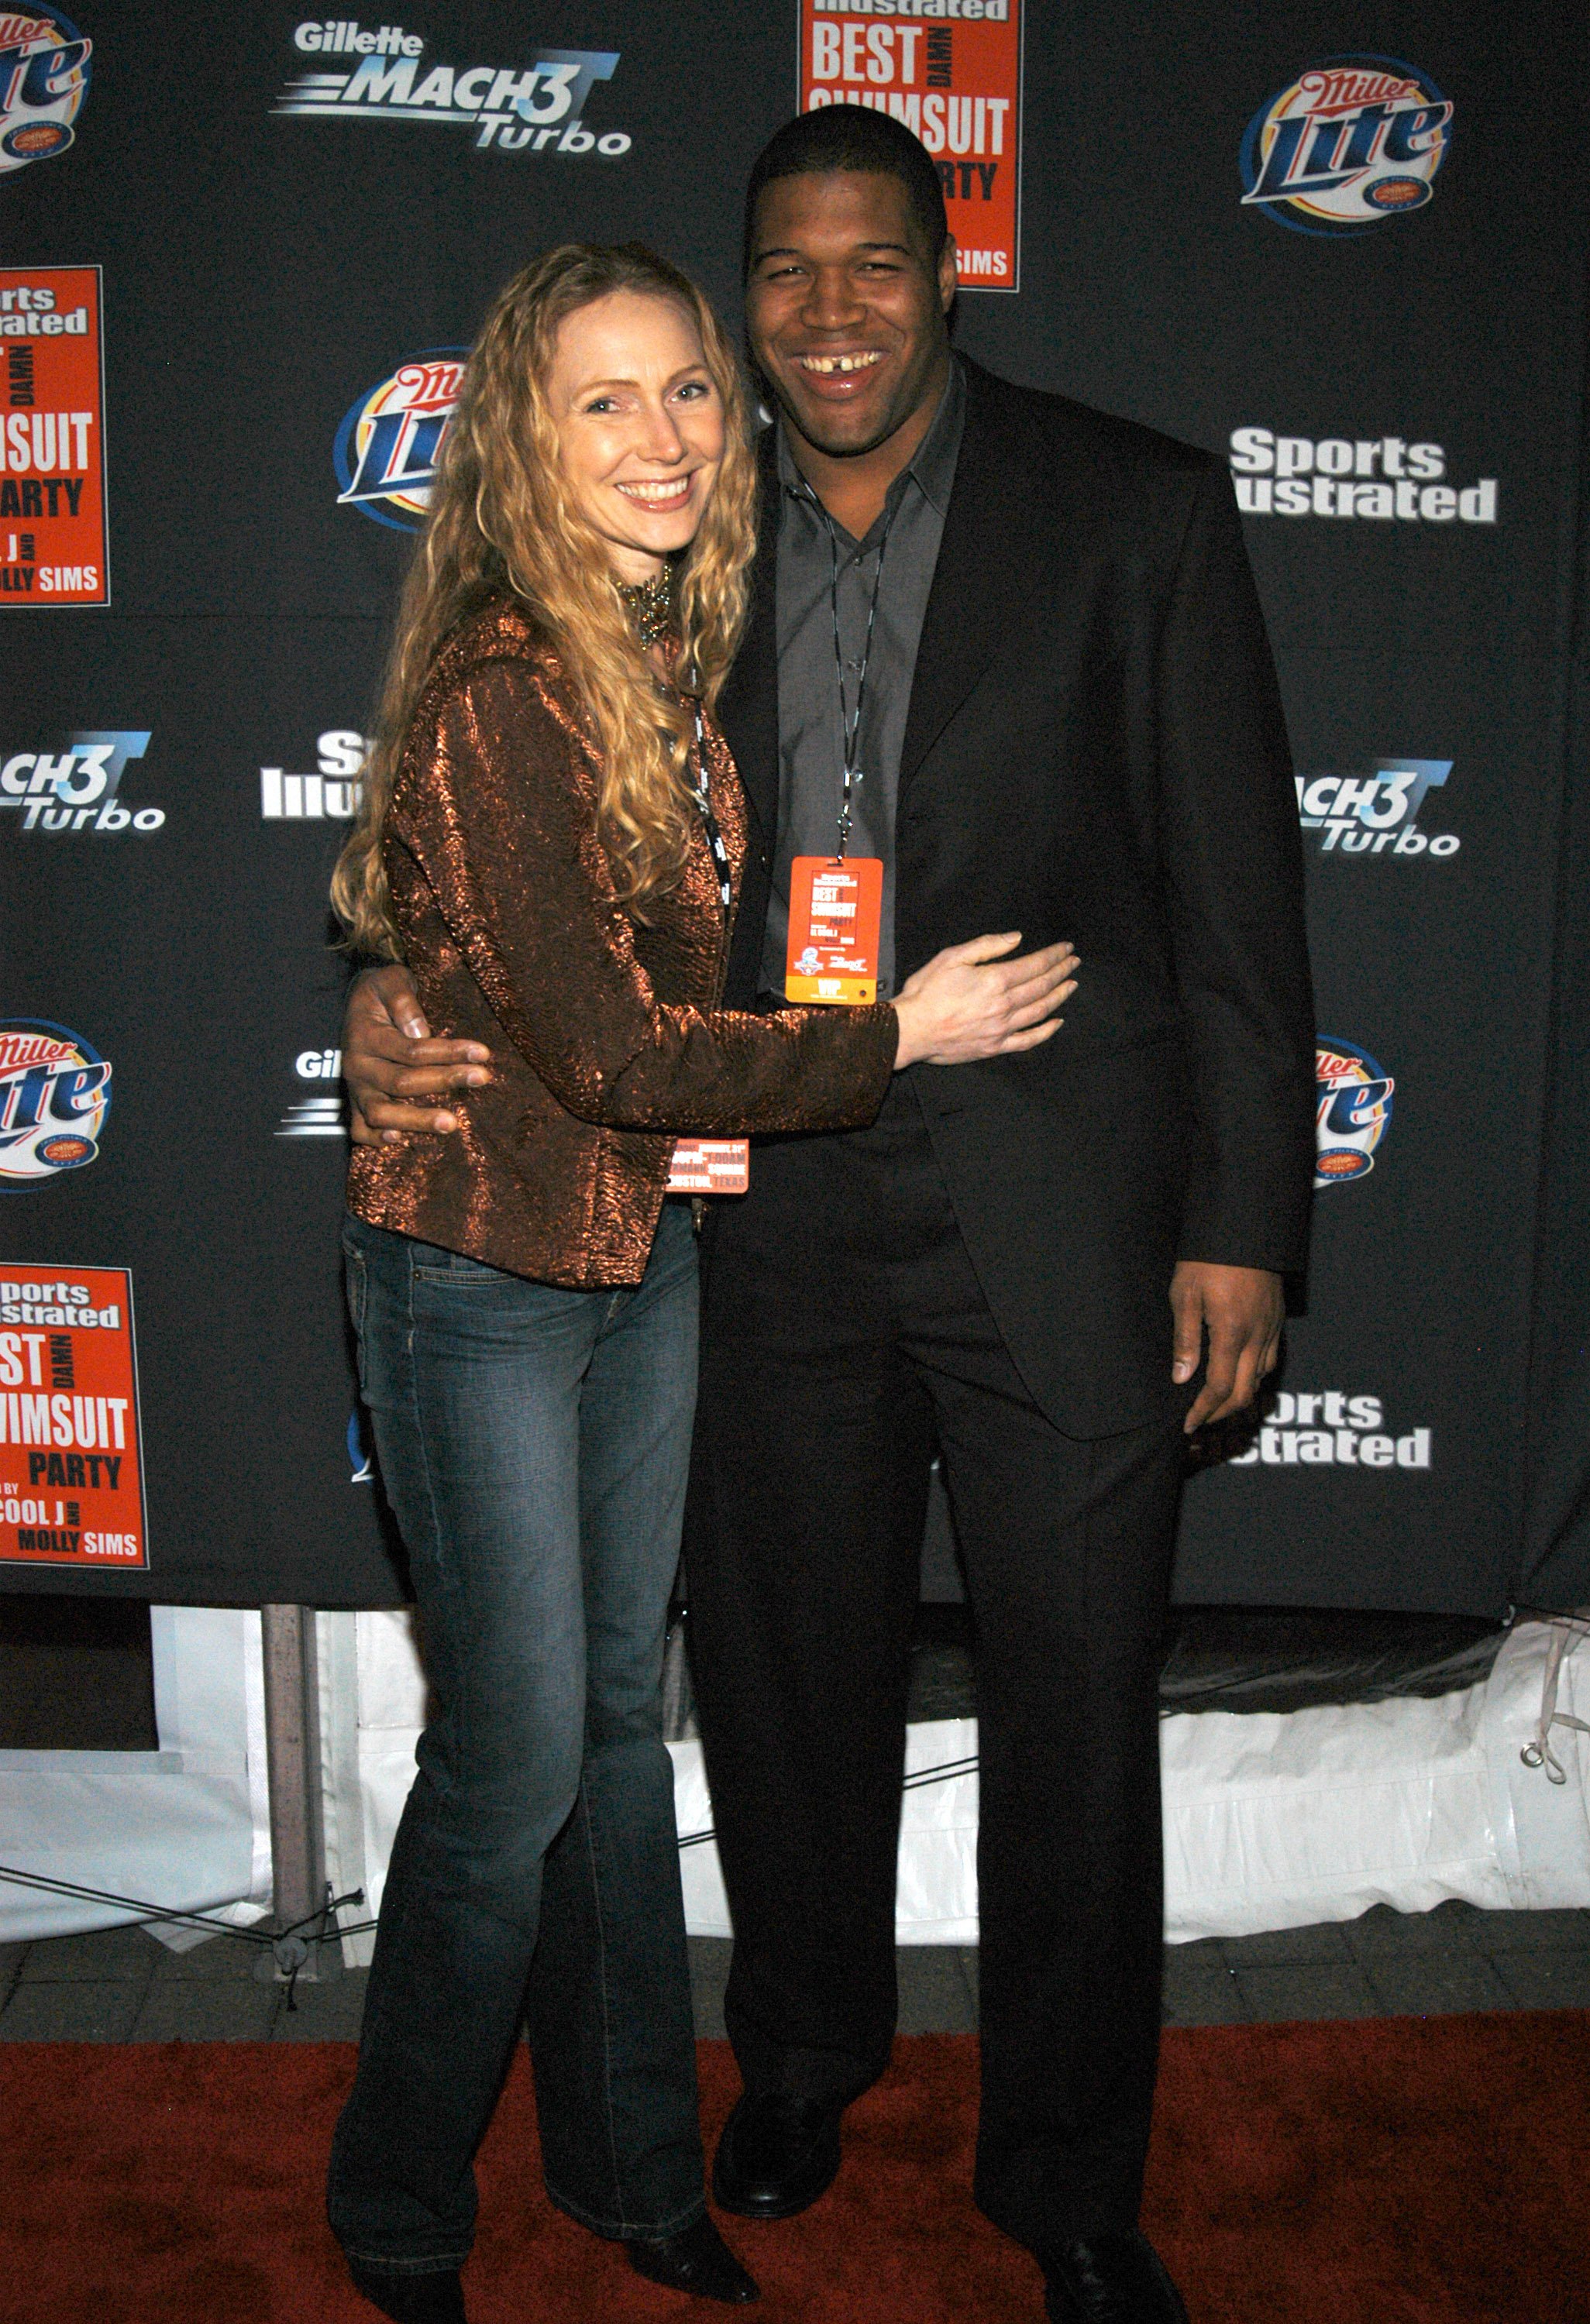 Michael Strahan and wife Jean Muggli circa January 2004 | Photo: Getty Images